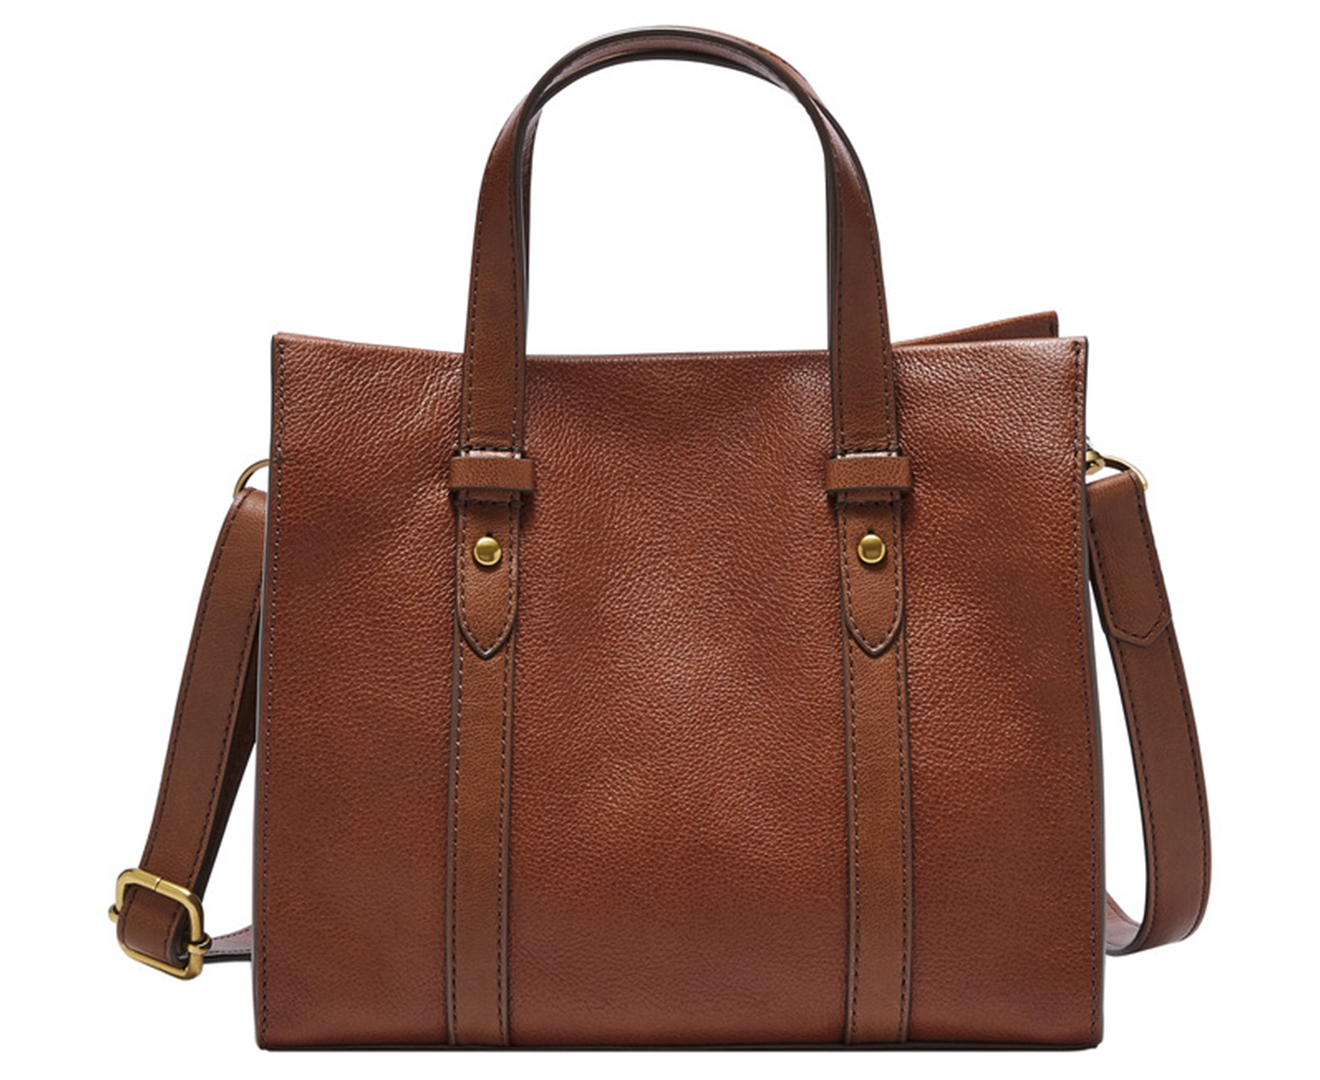 Fossil Kingston Leather Satchel - Brown 